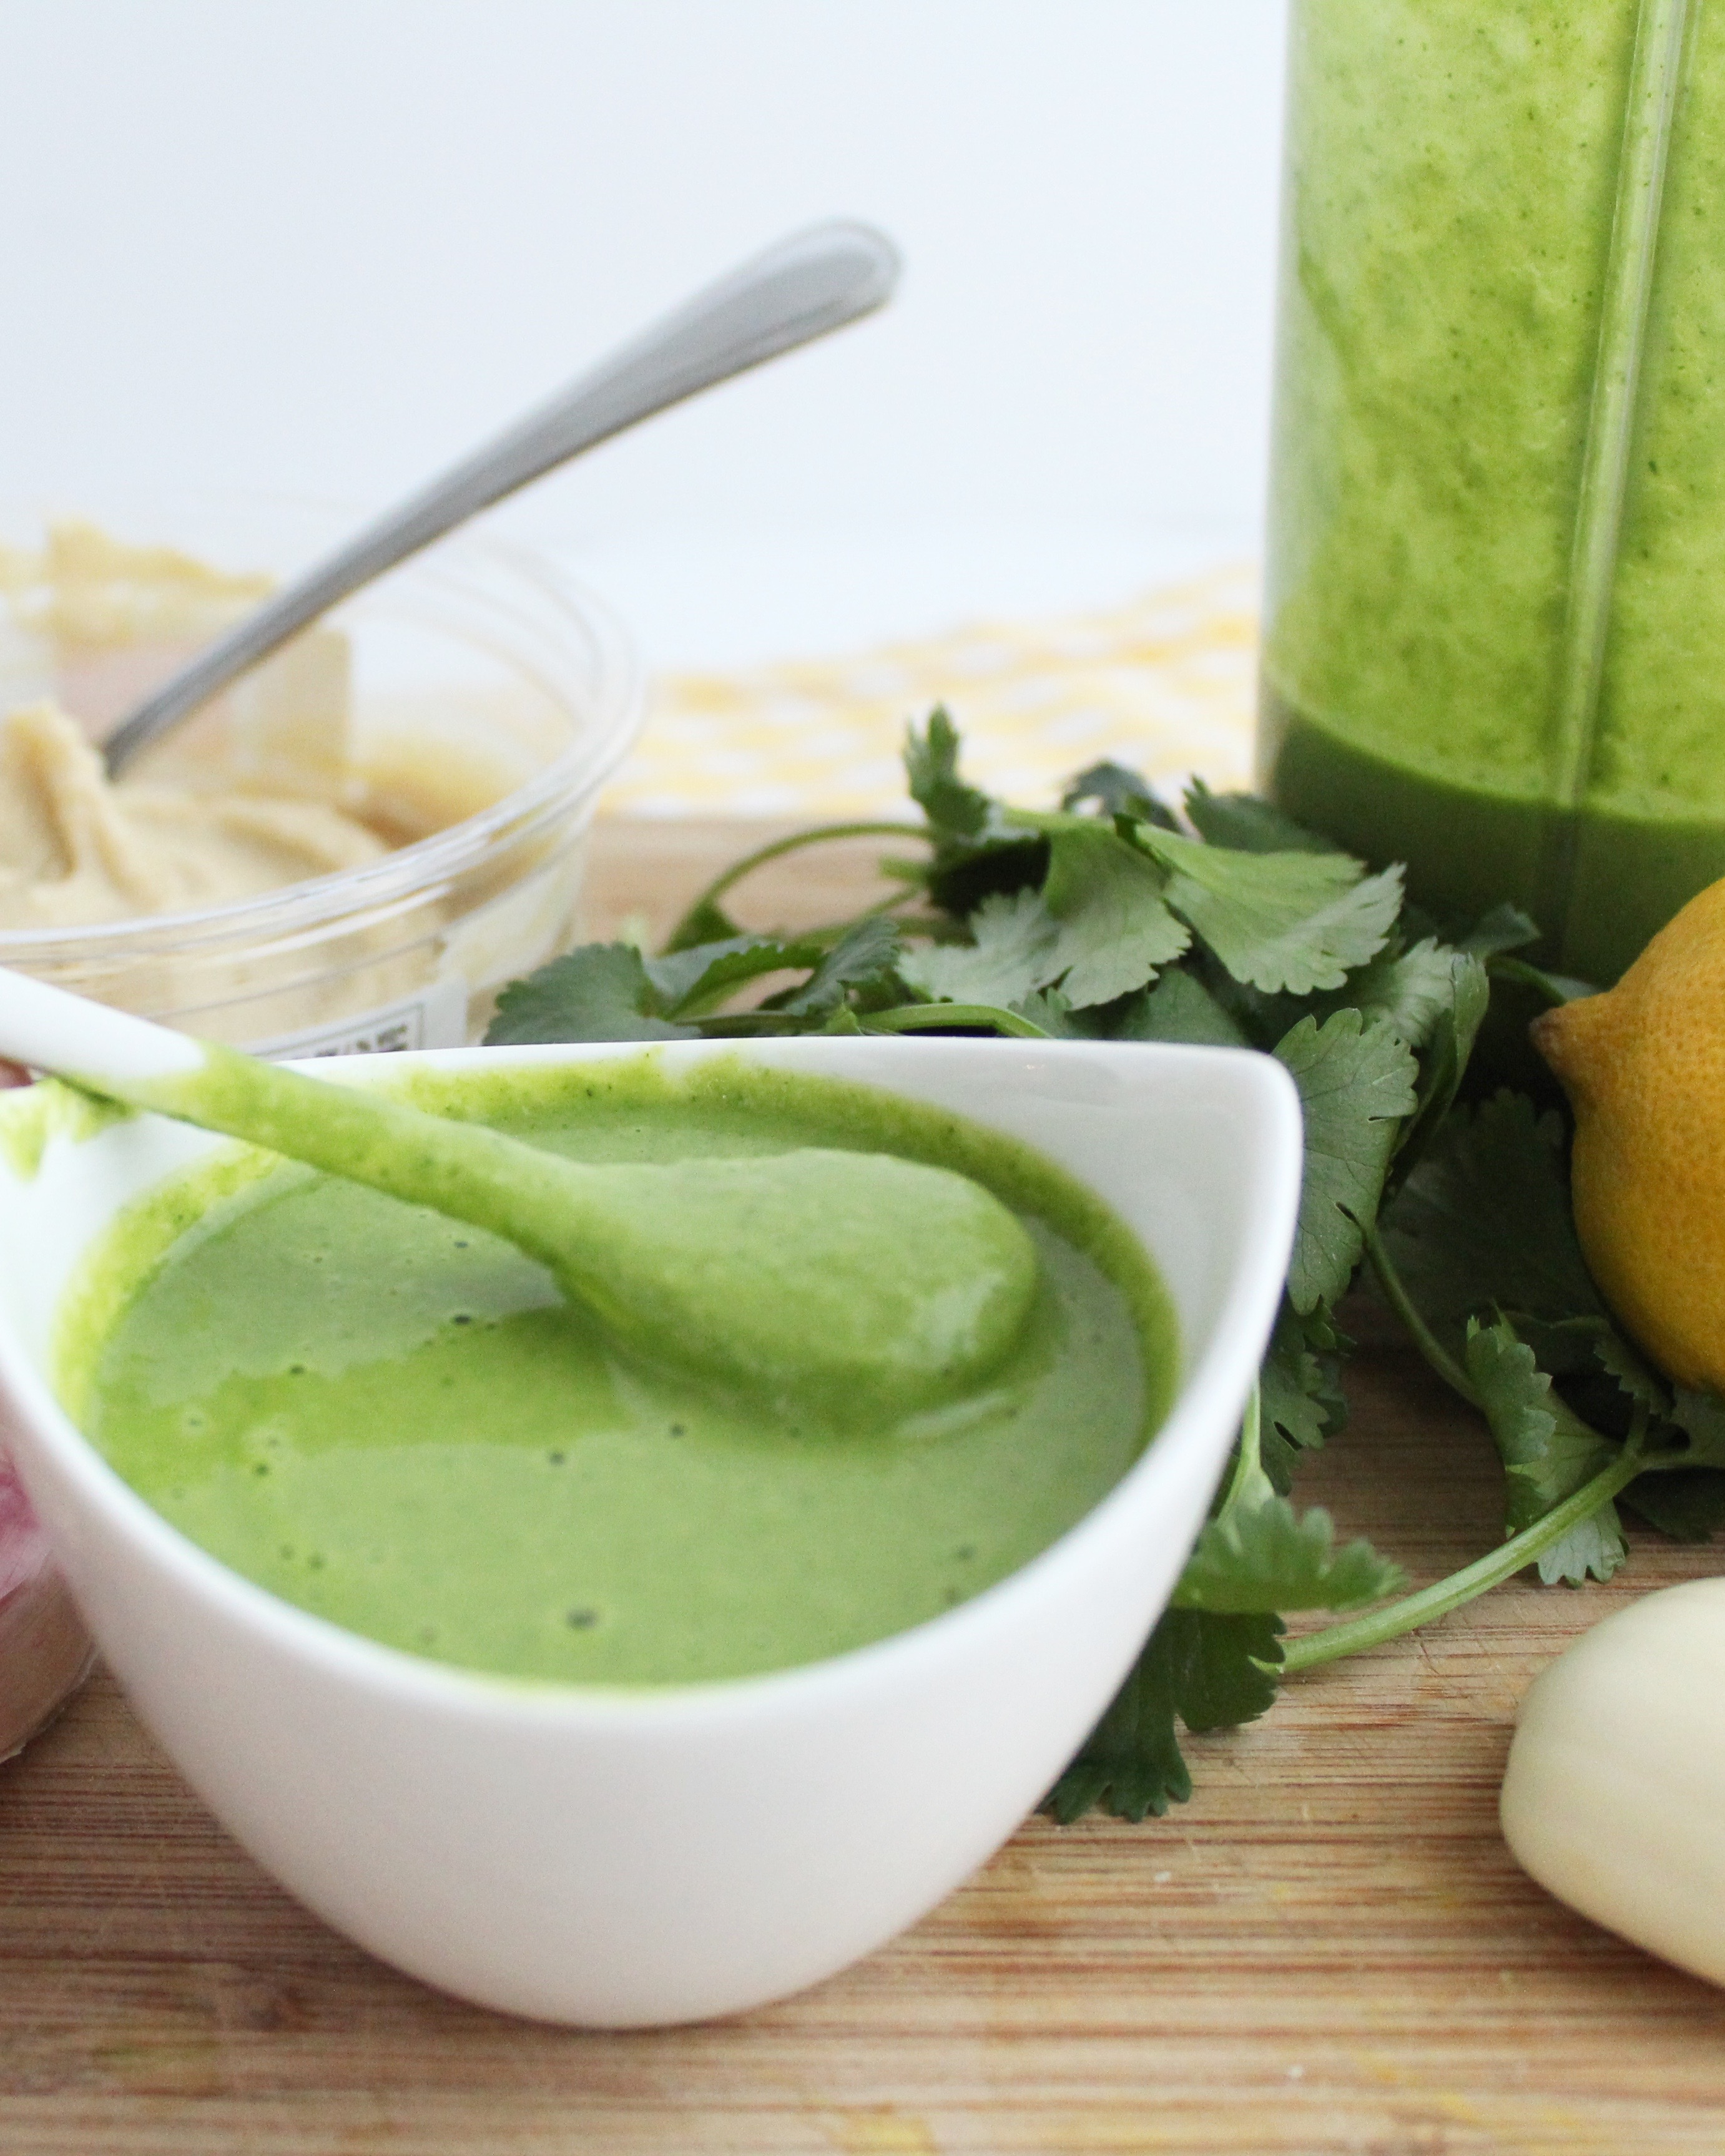 Your new favourite sauce for taco night! Cilantro Sauce! Yum!!!